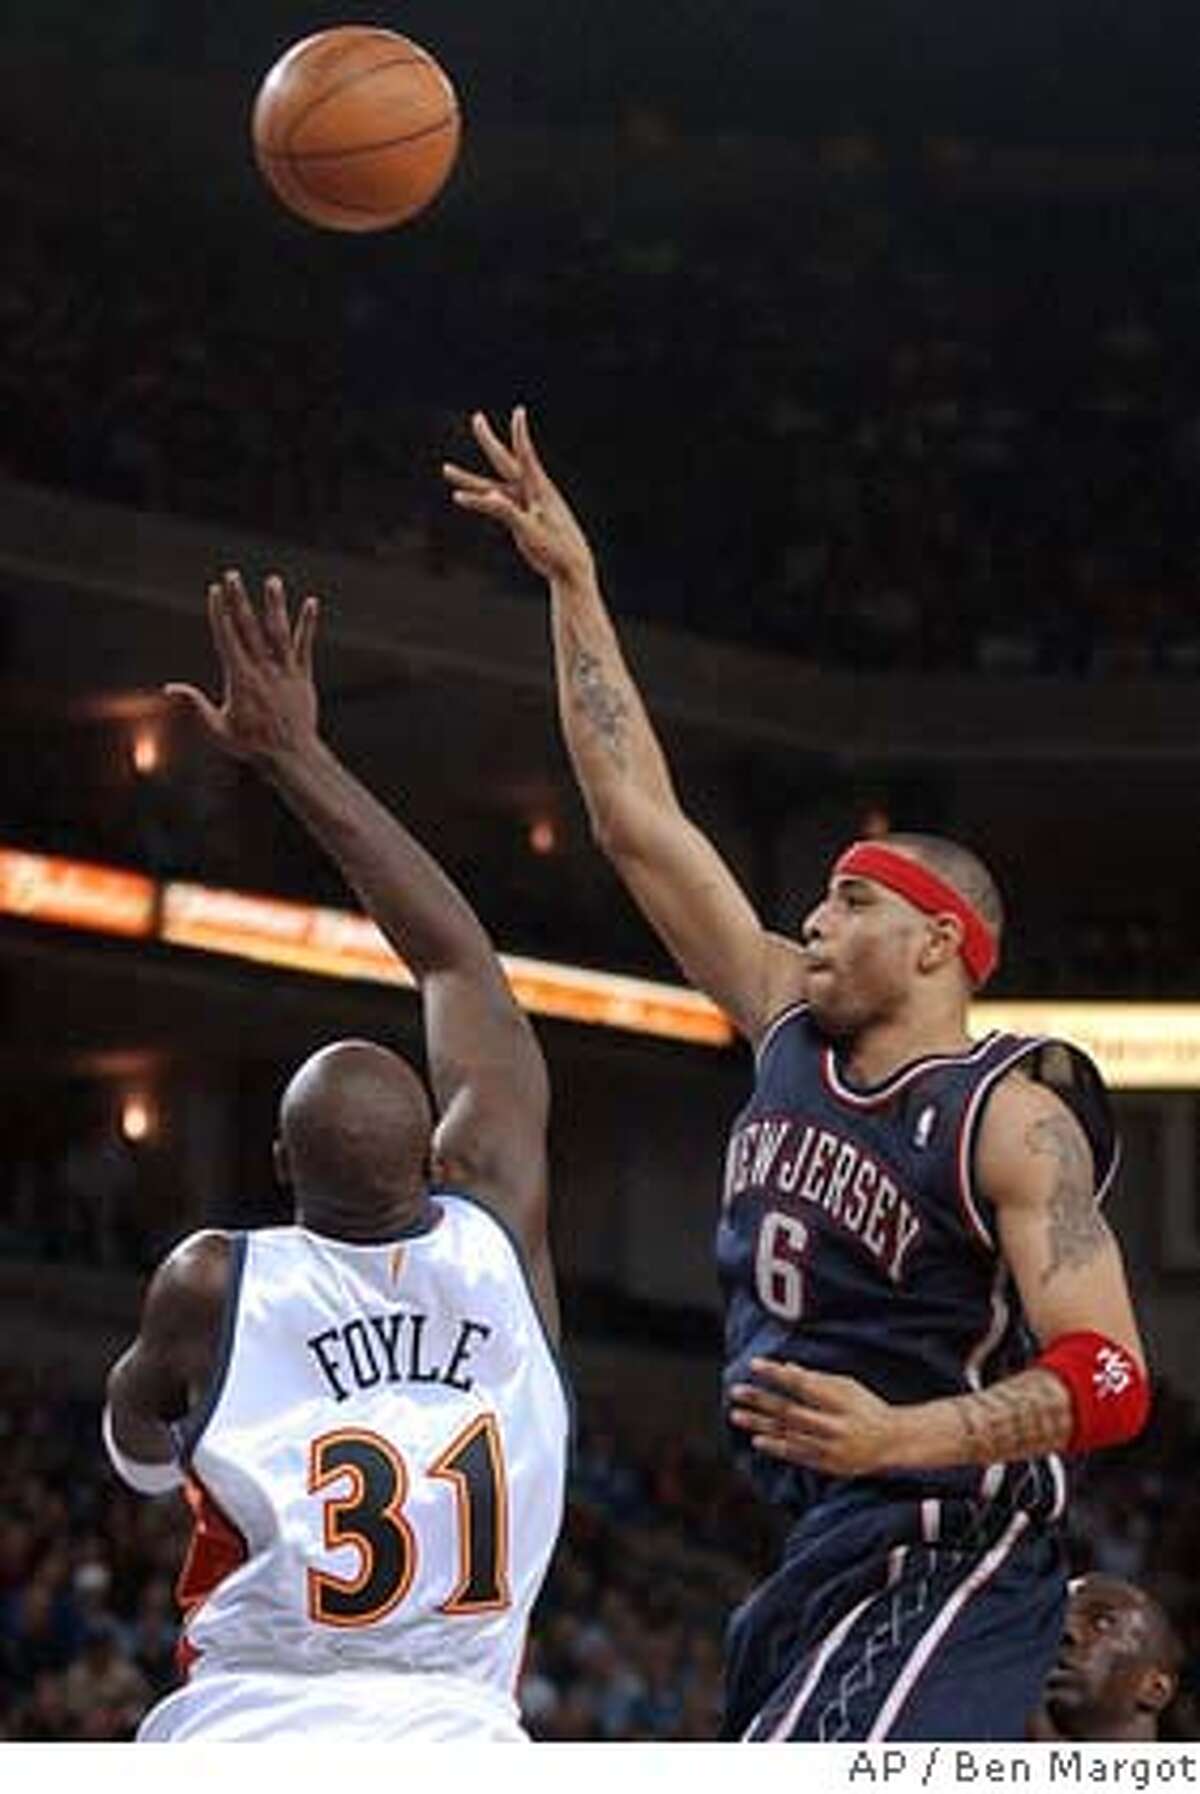 New Jersey Nets' Kenyon Martin (6) goes up for a shot over Golden State Warriors' Adonal Foyle (31) in the first half Friday, March 5, 2004, in Oakland, Calif. (AP Photo/Ben Margot)